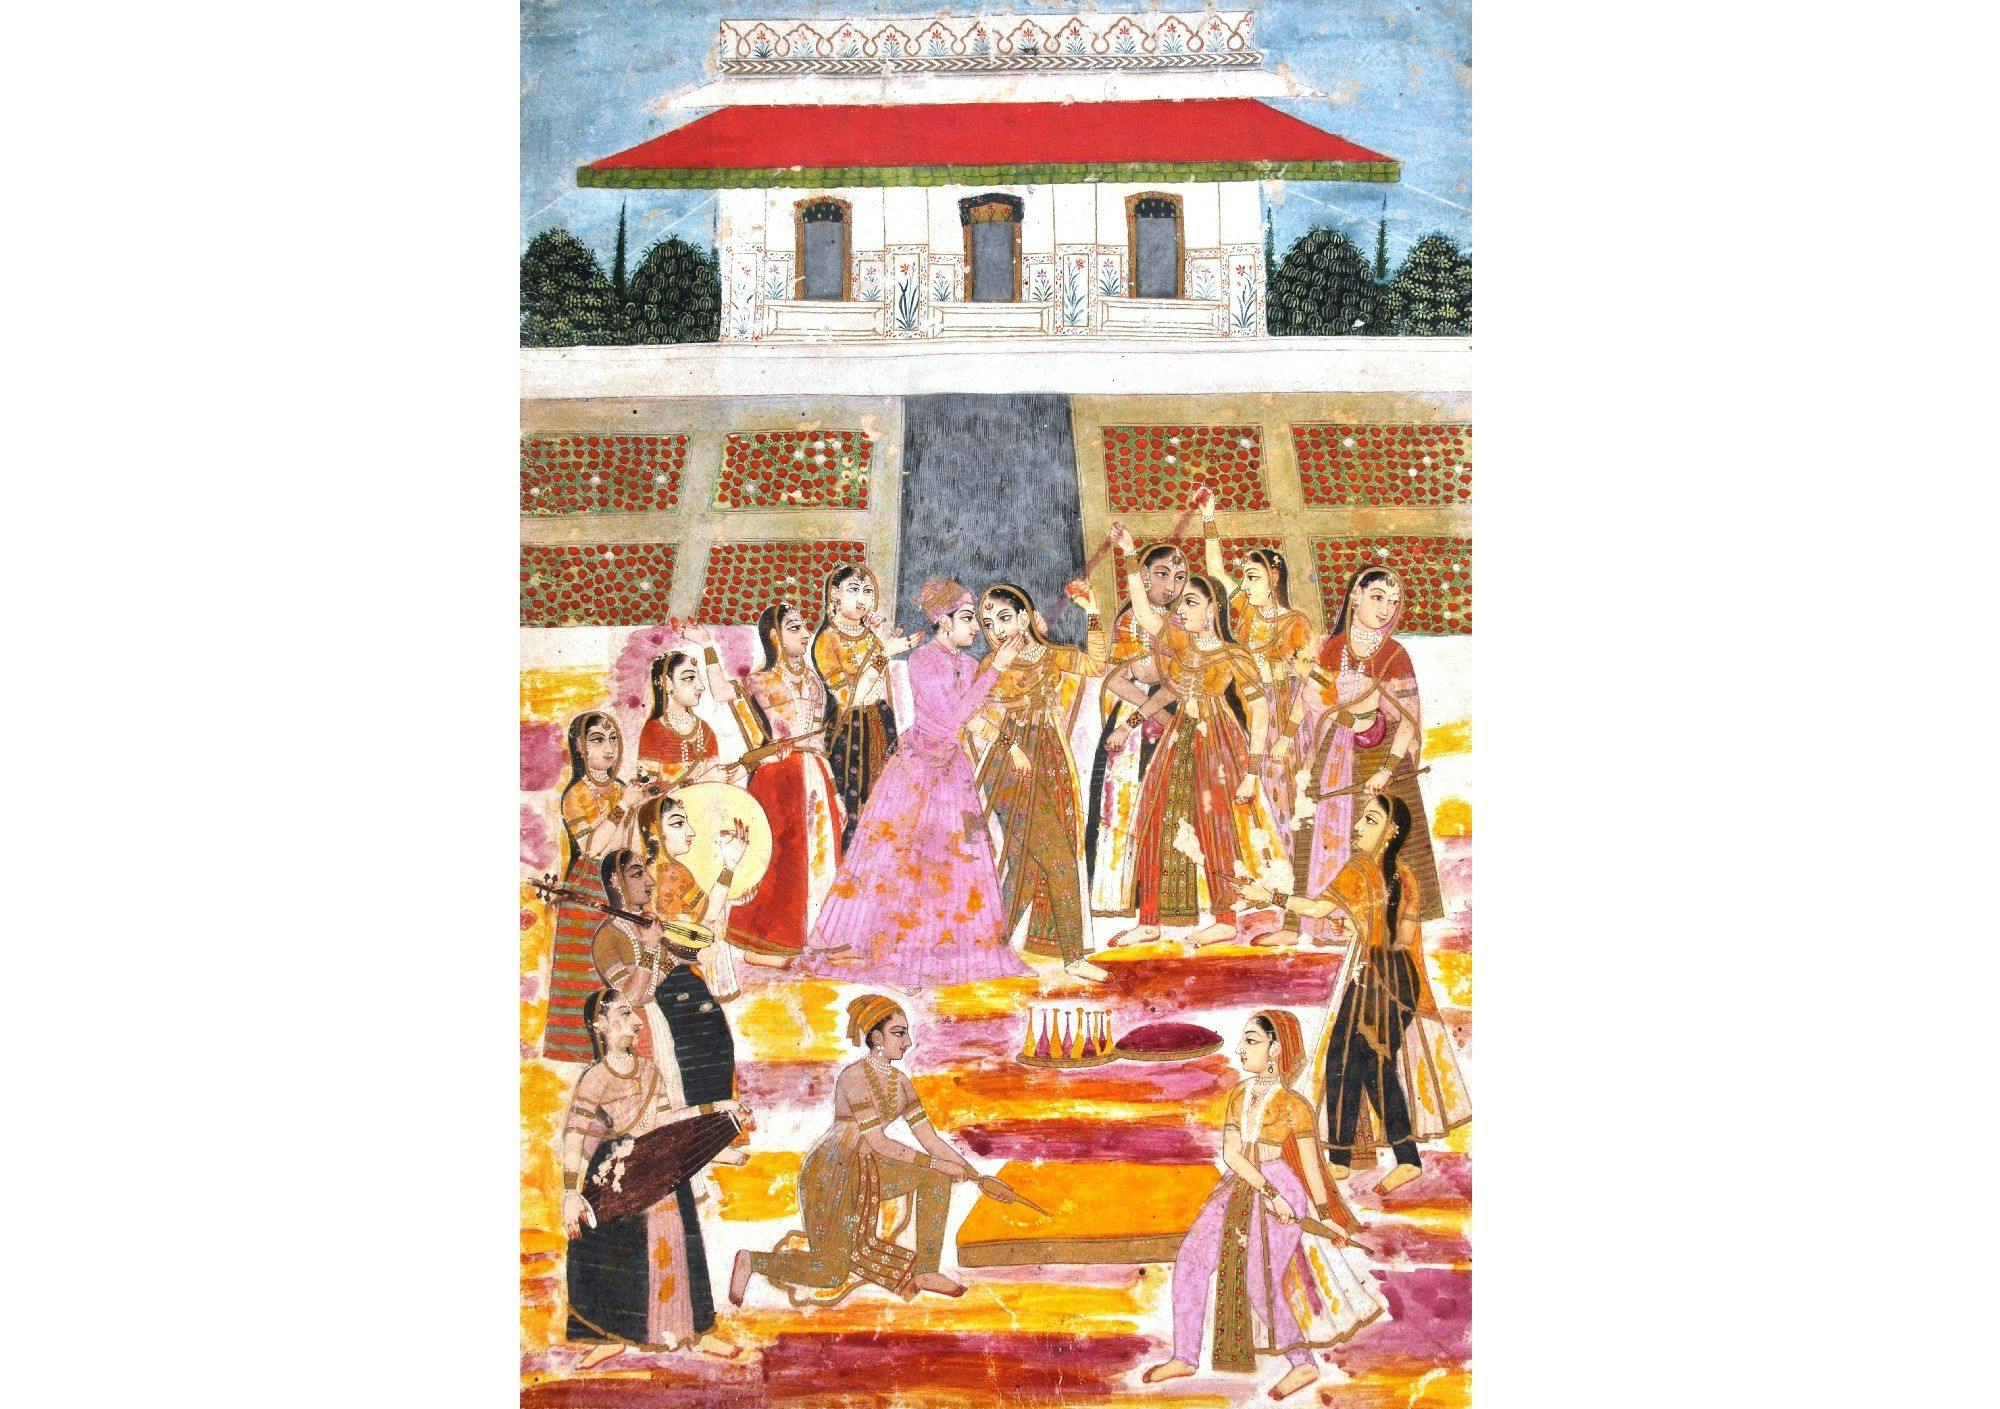 A Prince playing Holi in harem, Hyderabad, 1800